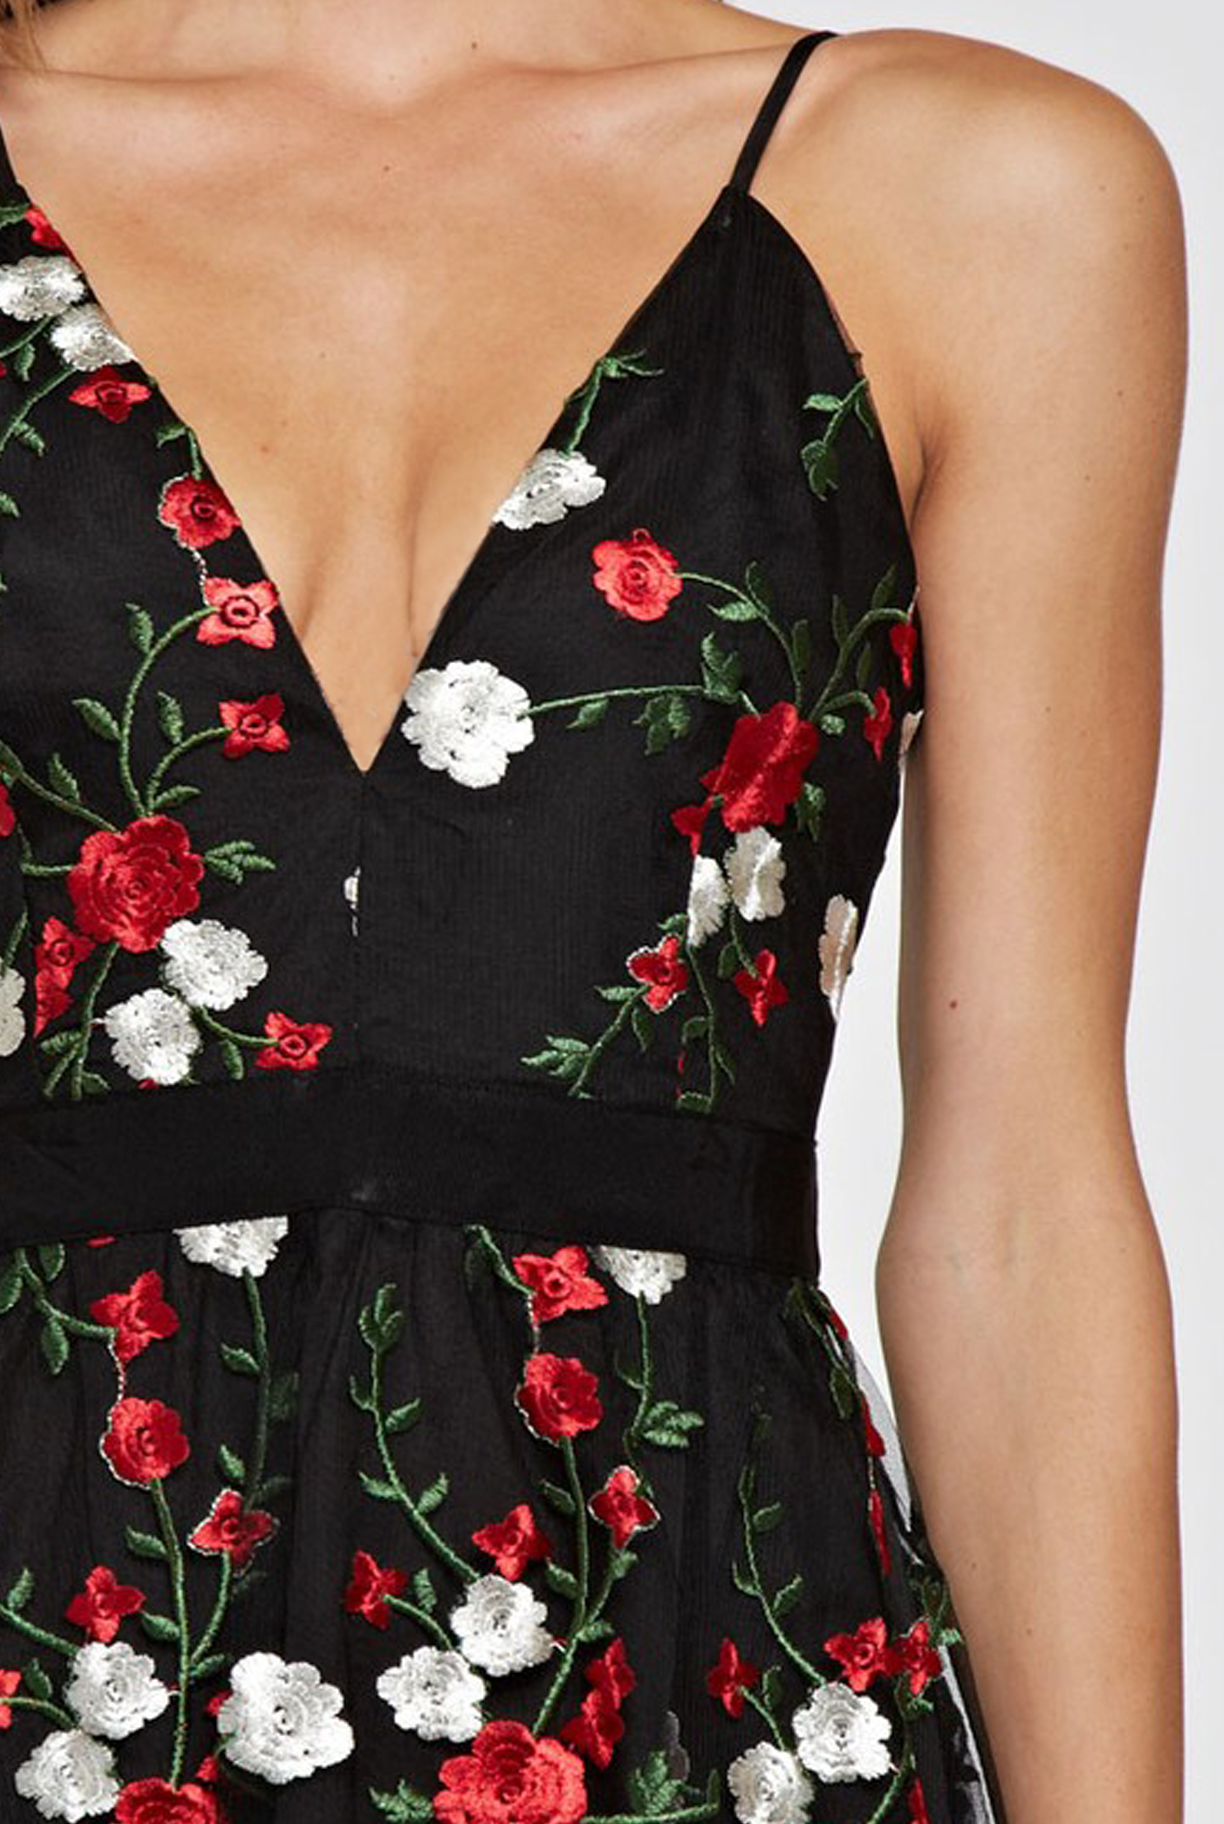 'Coming Up Roses' Dress